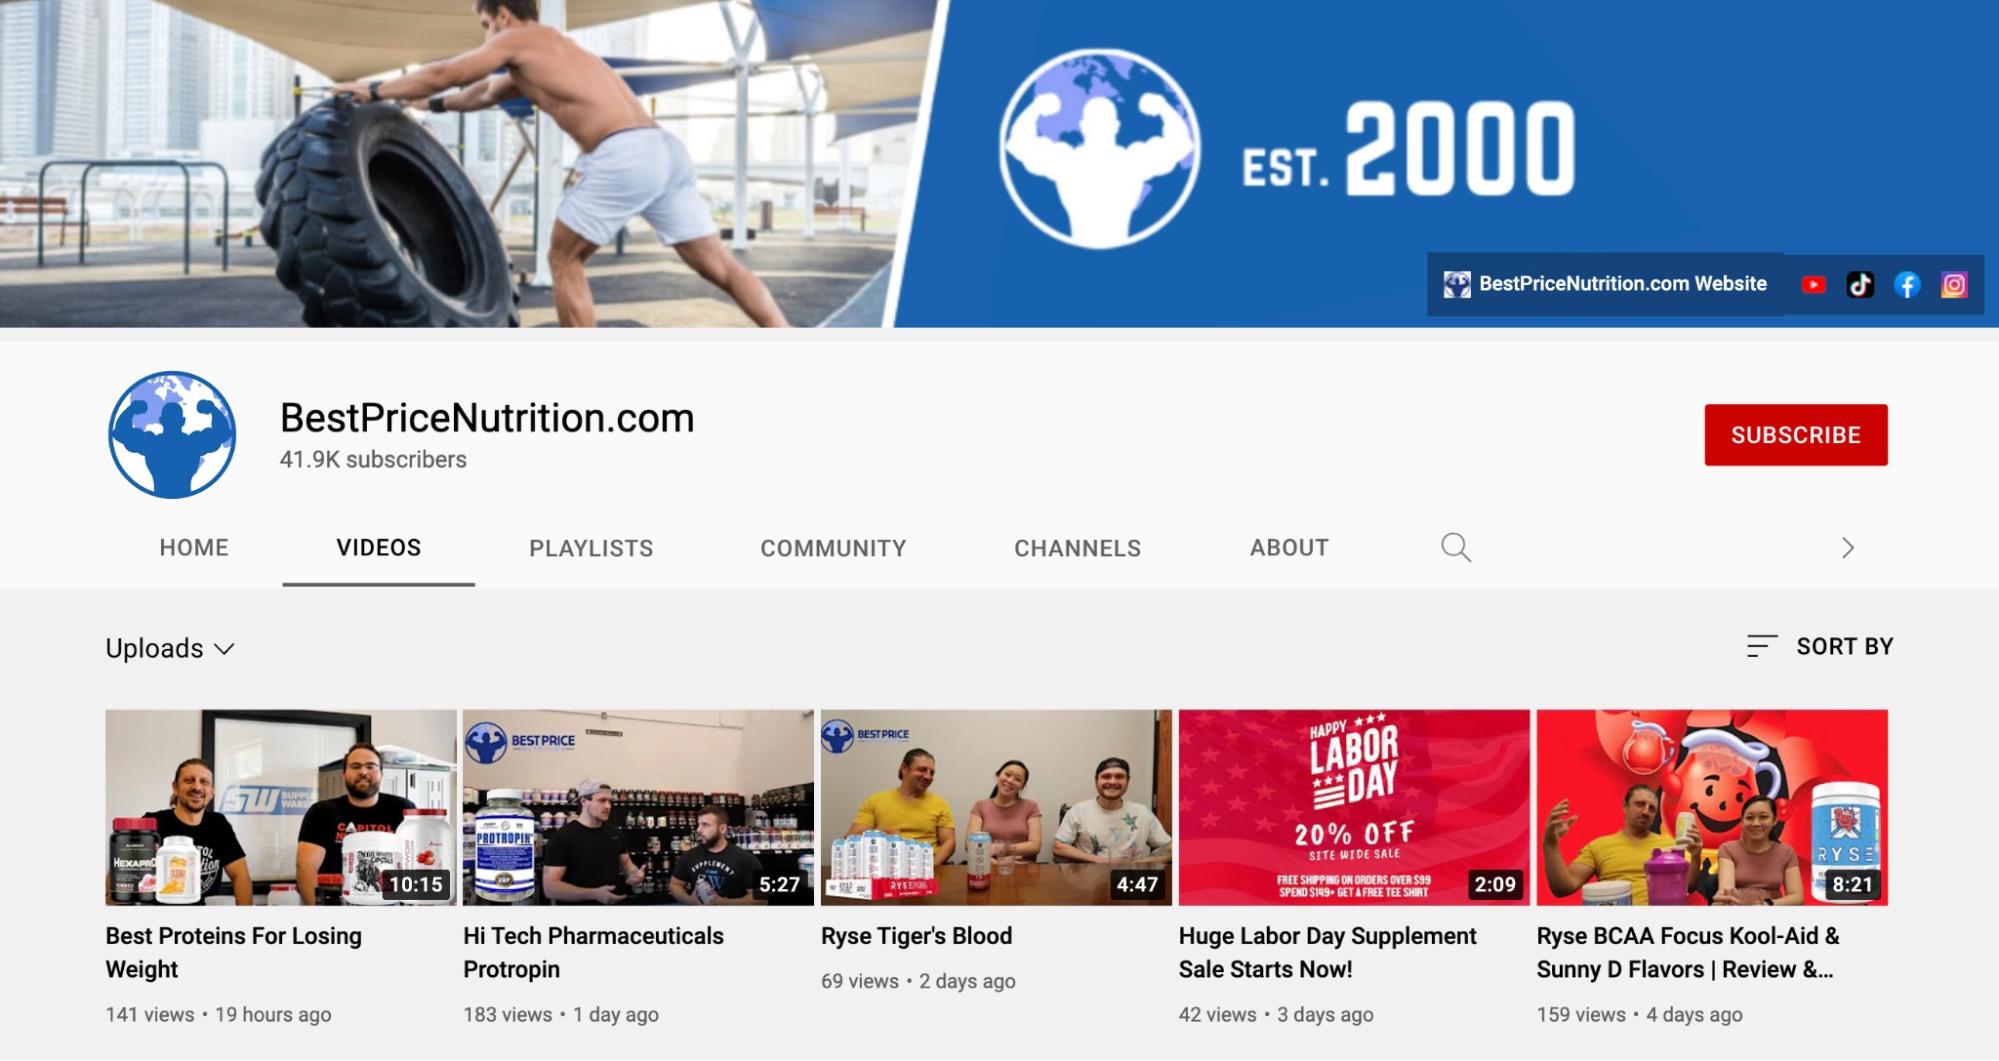 Best Price Nutrition’s latest YouTube videos on the best protein to lose weight and labor day supplement sales.